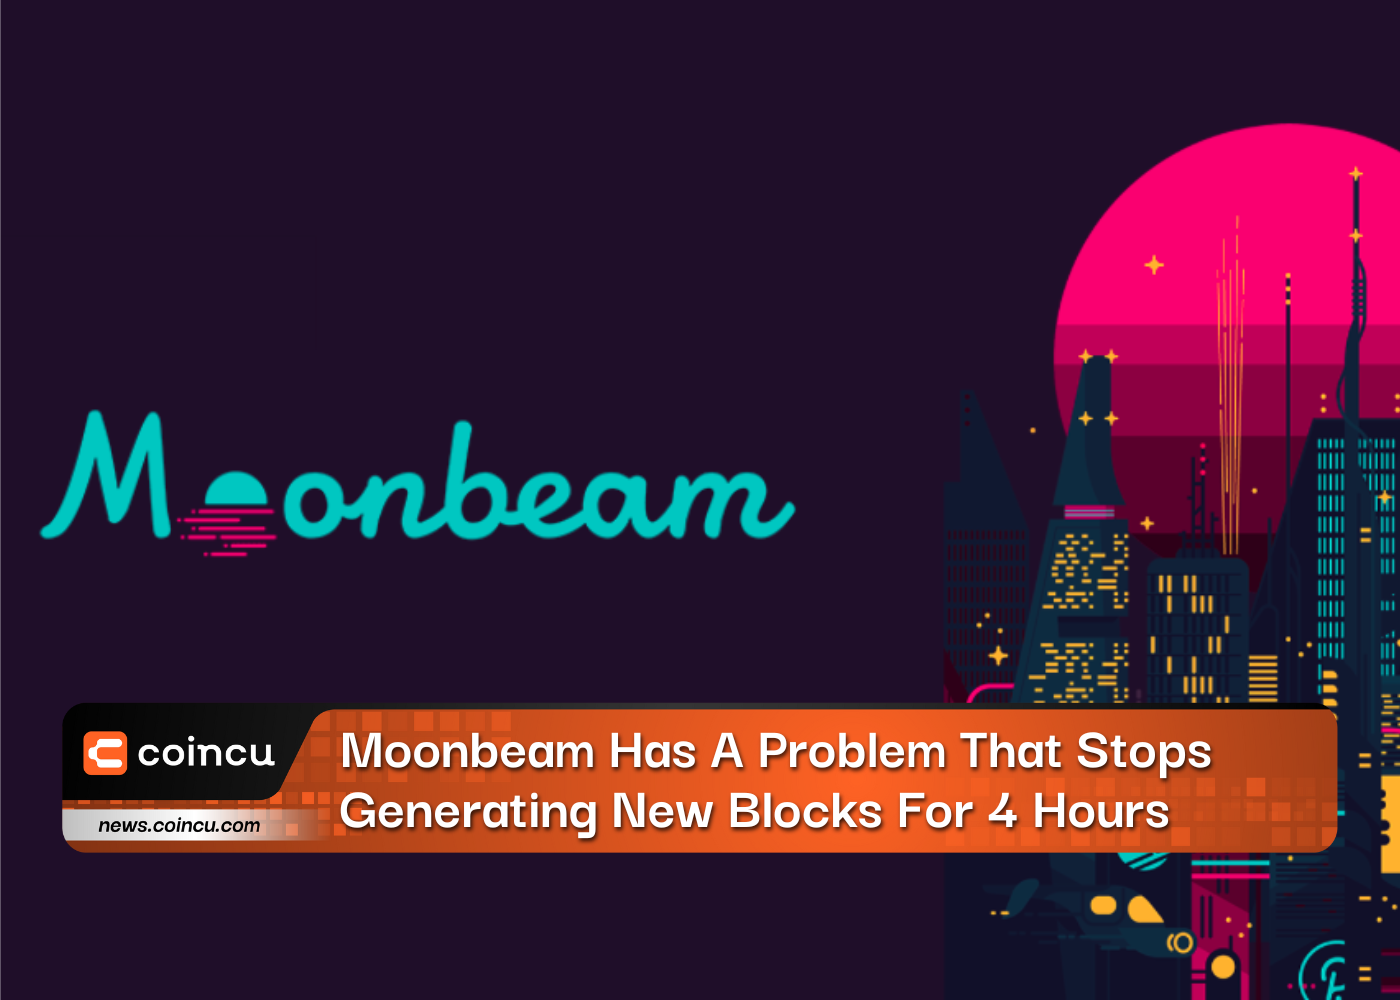 Moonbeam Has A Problem That Stops Generating New Blocks For 4 Hours